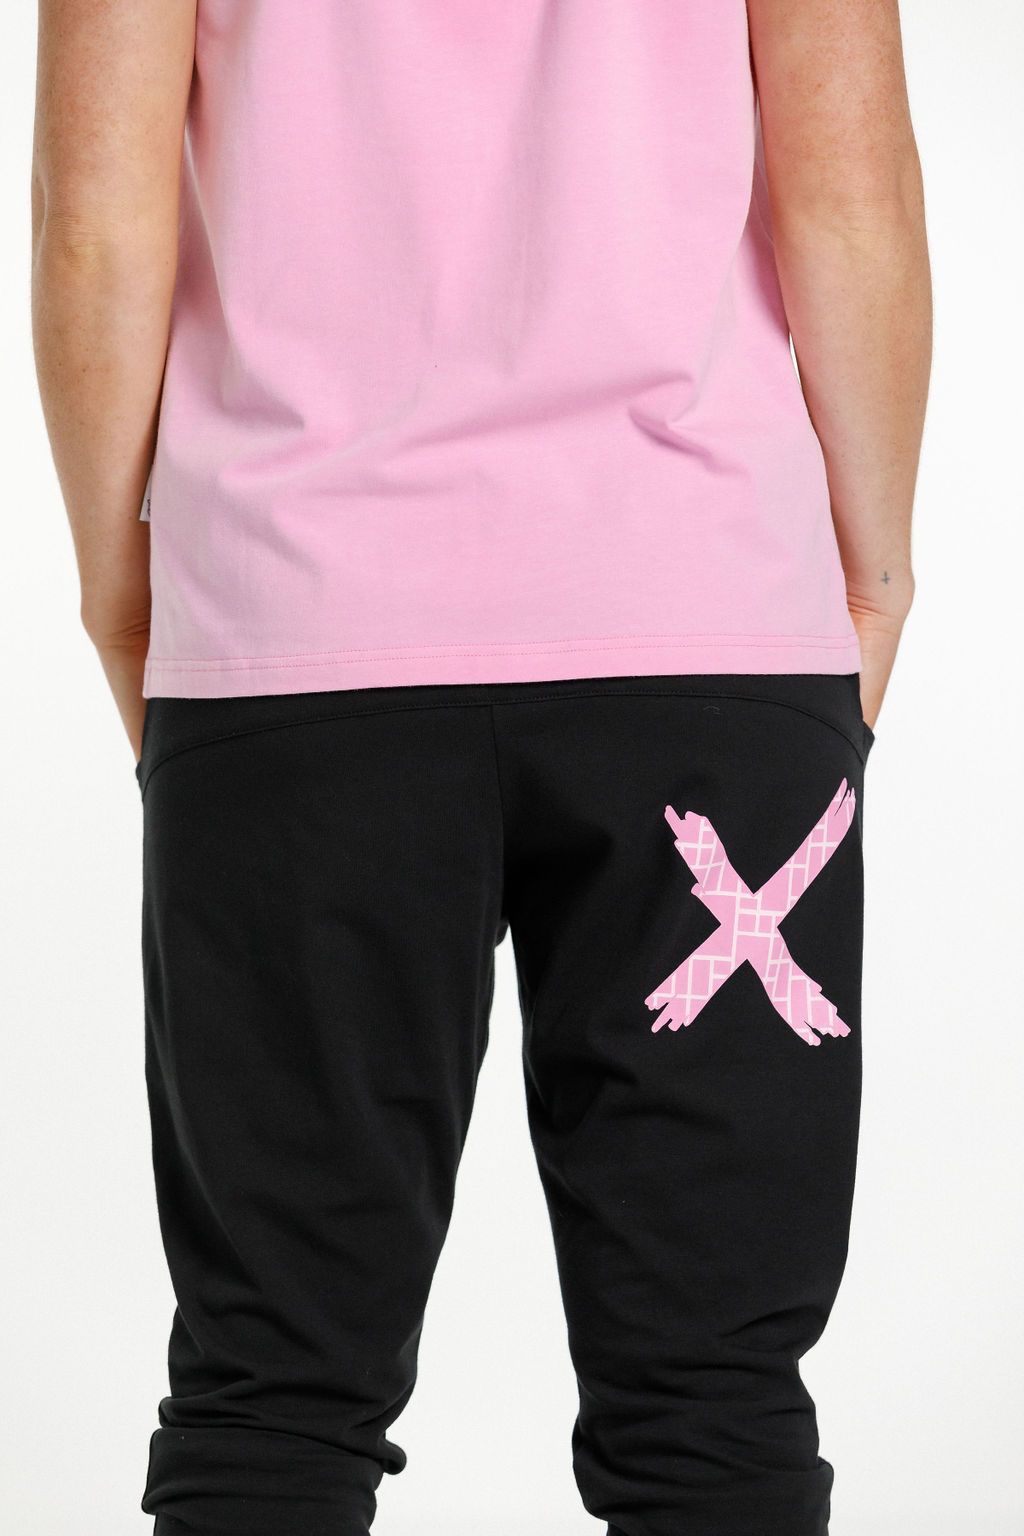 Home-Lee Apartment Pants - Black with Pink Bloom X